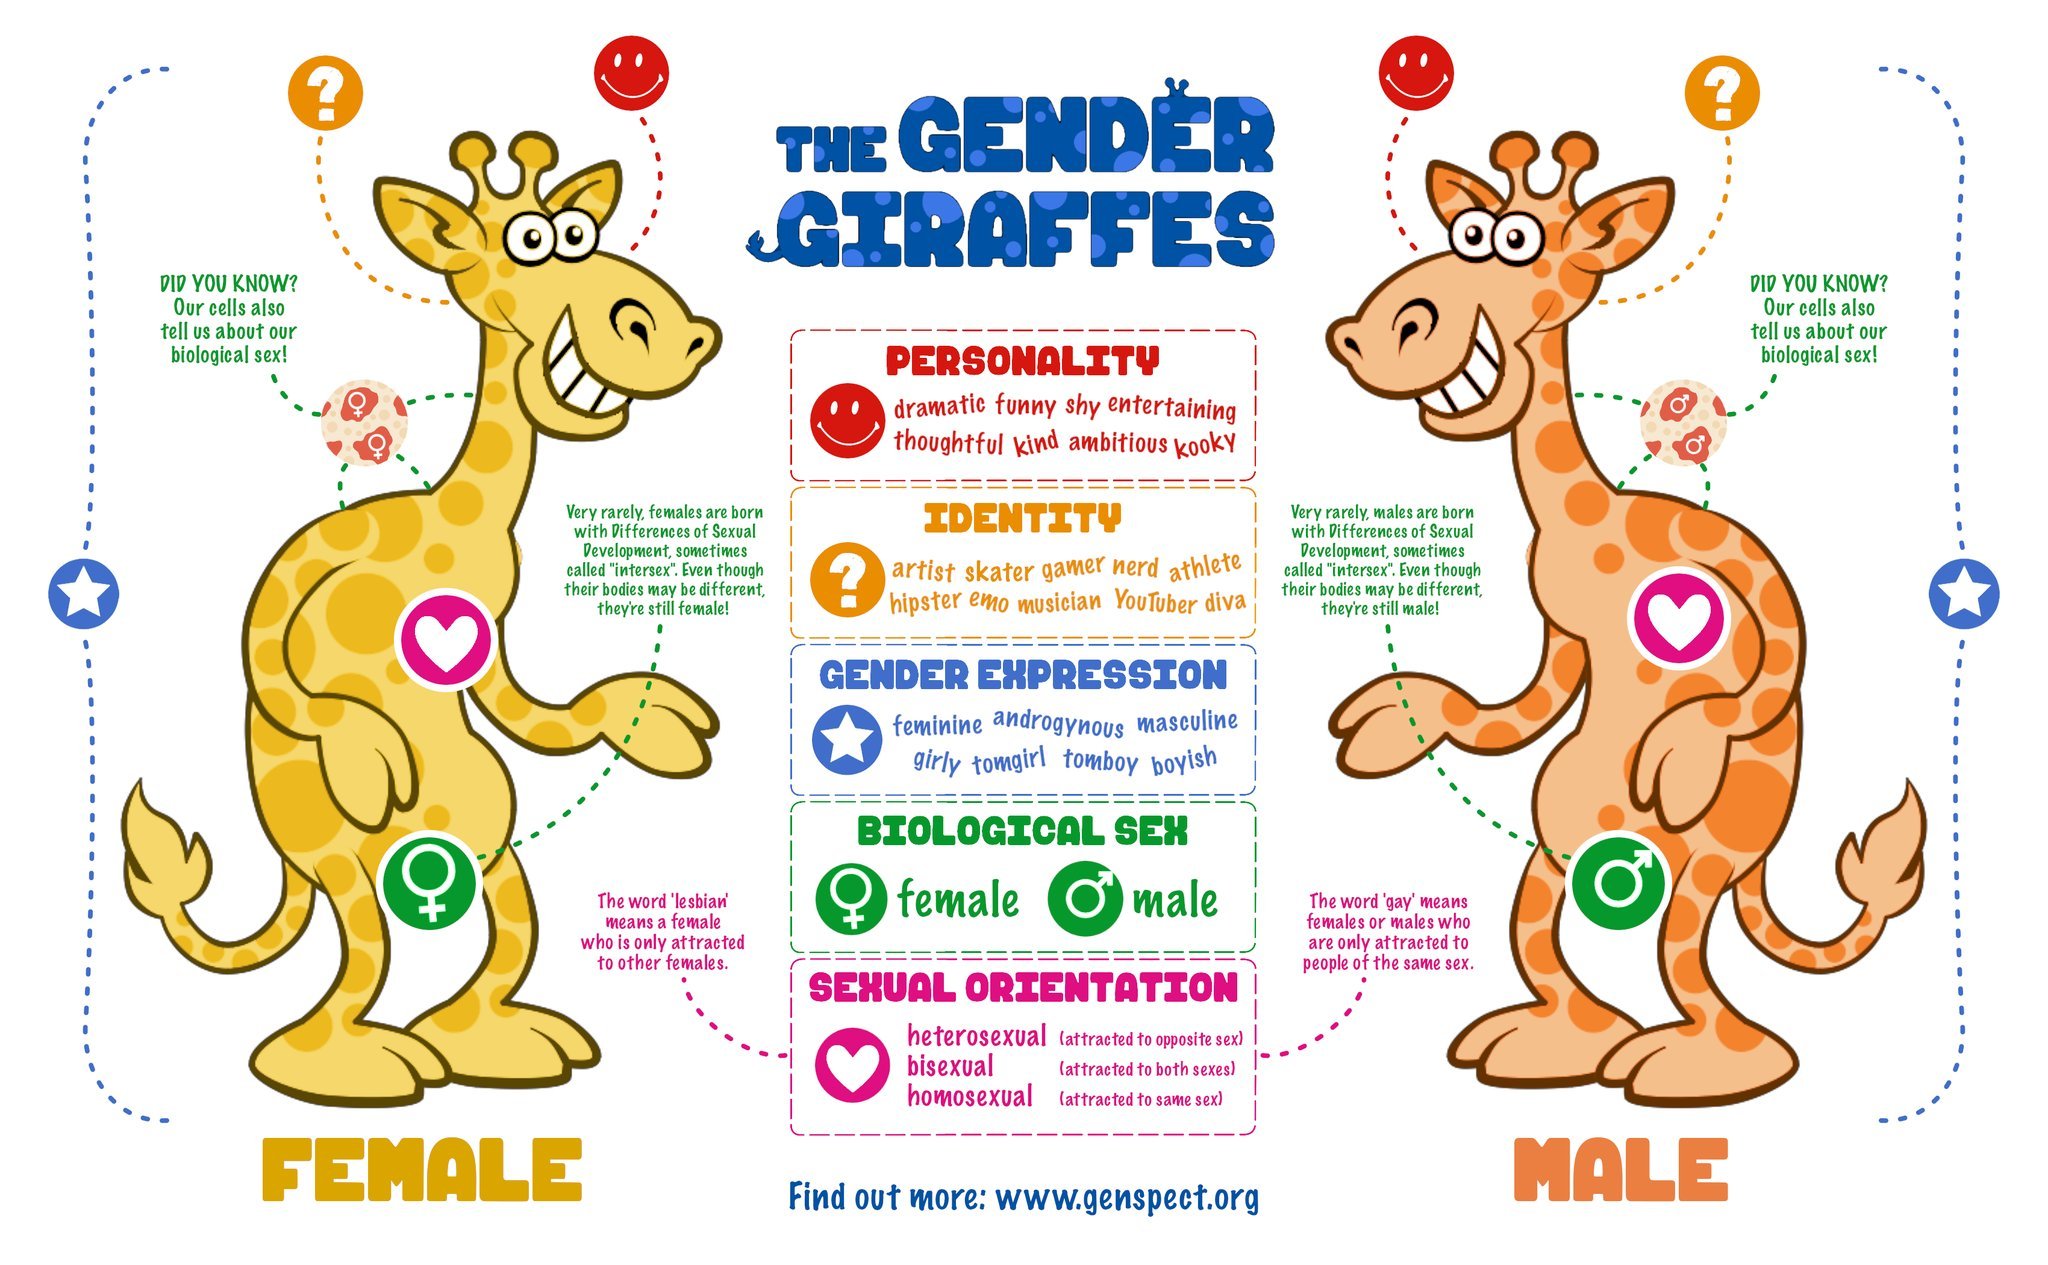 Genspect on Twitter: "We designed the Giraffe especially for teachers who are mandated to teach about 'sex and gender'. We're very pleased that educators are already using this fact-based resource and